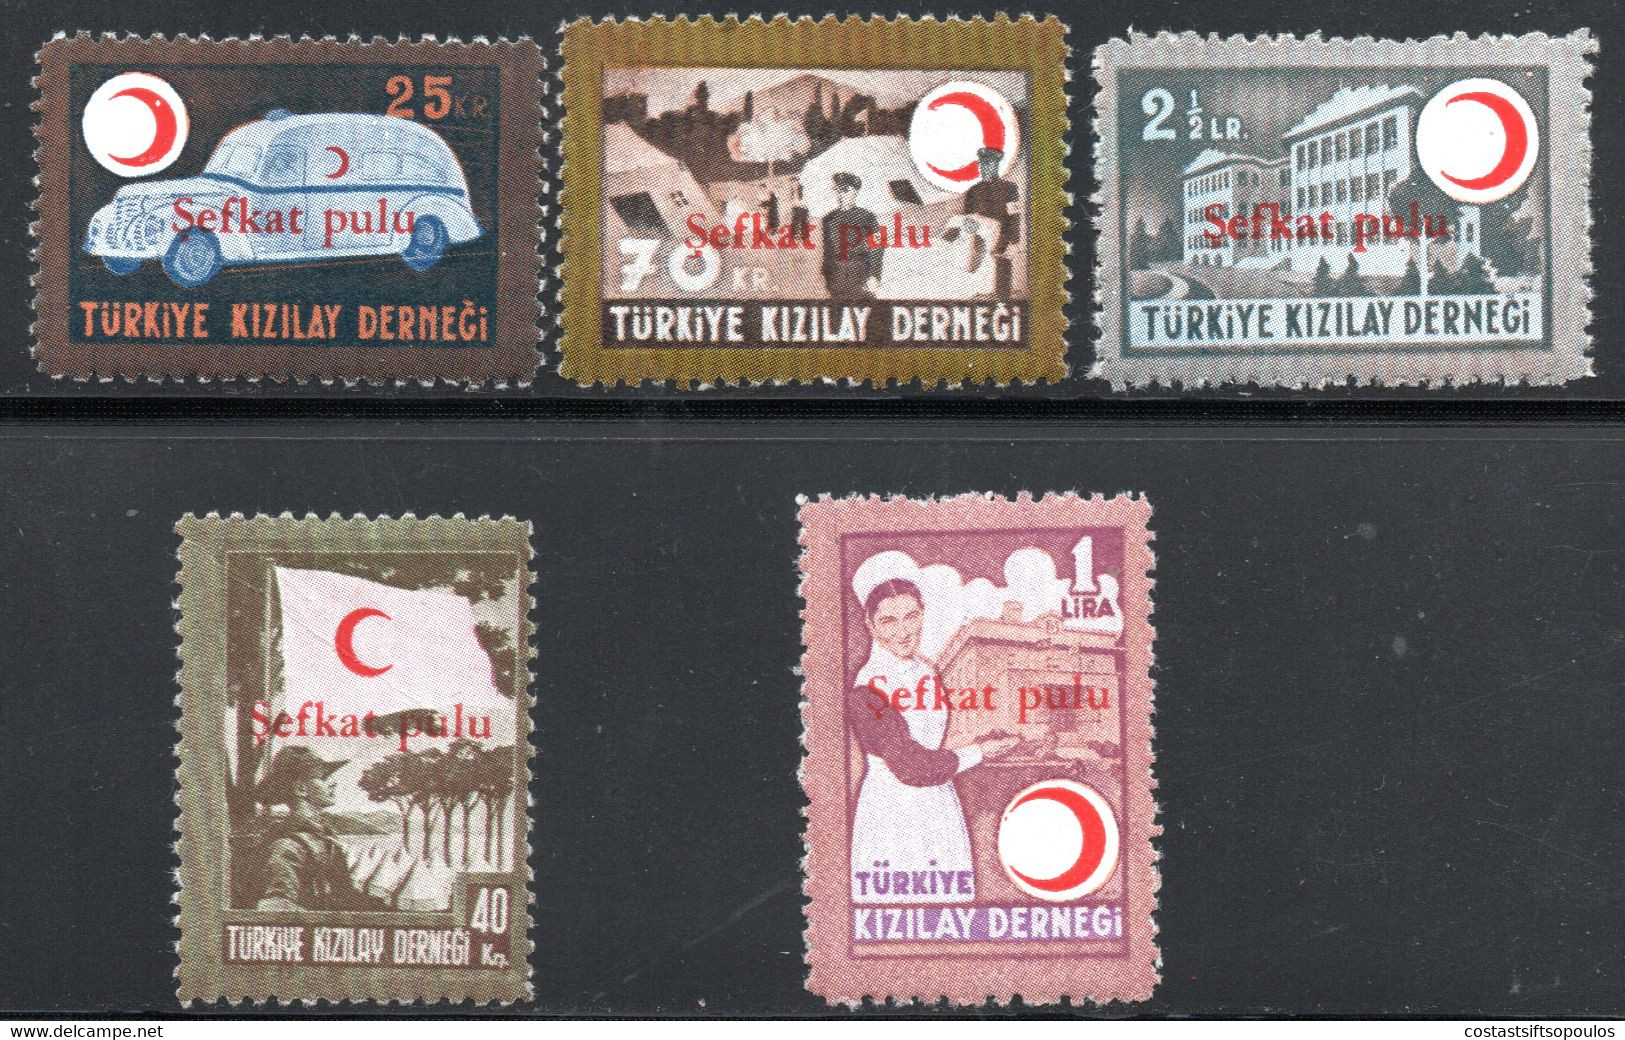 1019.TURKEY,1949 .SEFKAT PULU CHARITY RED CRESCENT,MICH. 159-163 MNH SHORT BSET,40 K. FLAG CREASED - Nuovi